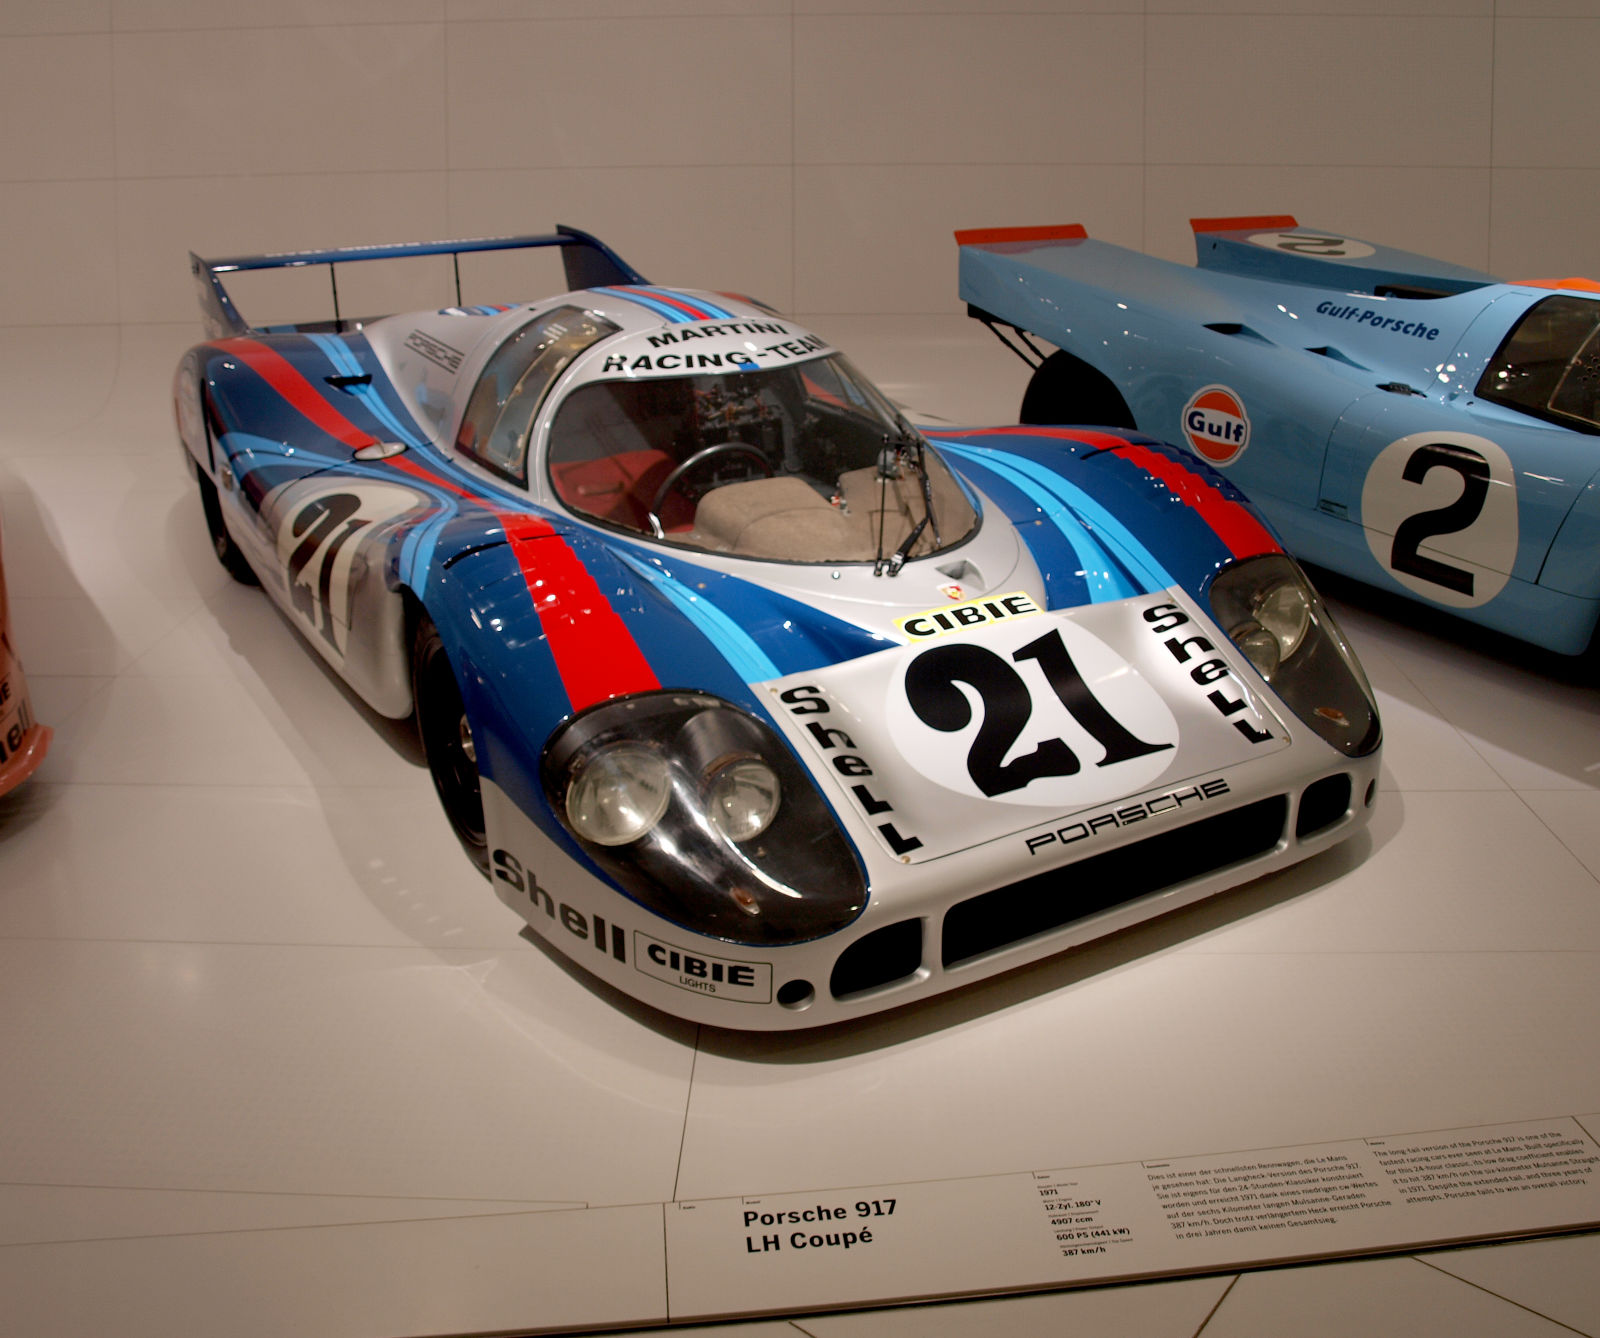 Held the fastest speed at Lemans record until the Peugeot beat it in 1988.